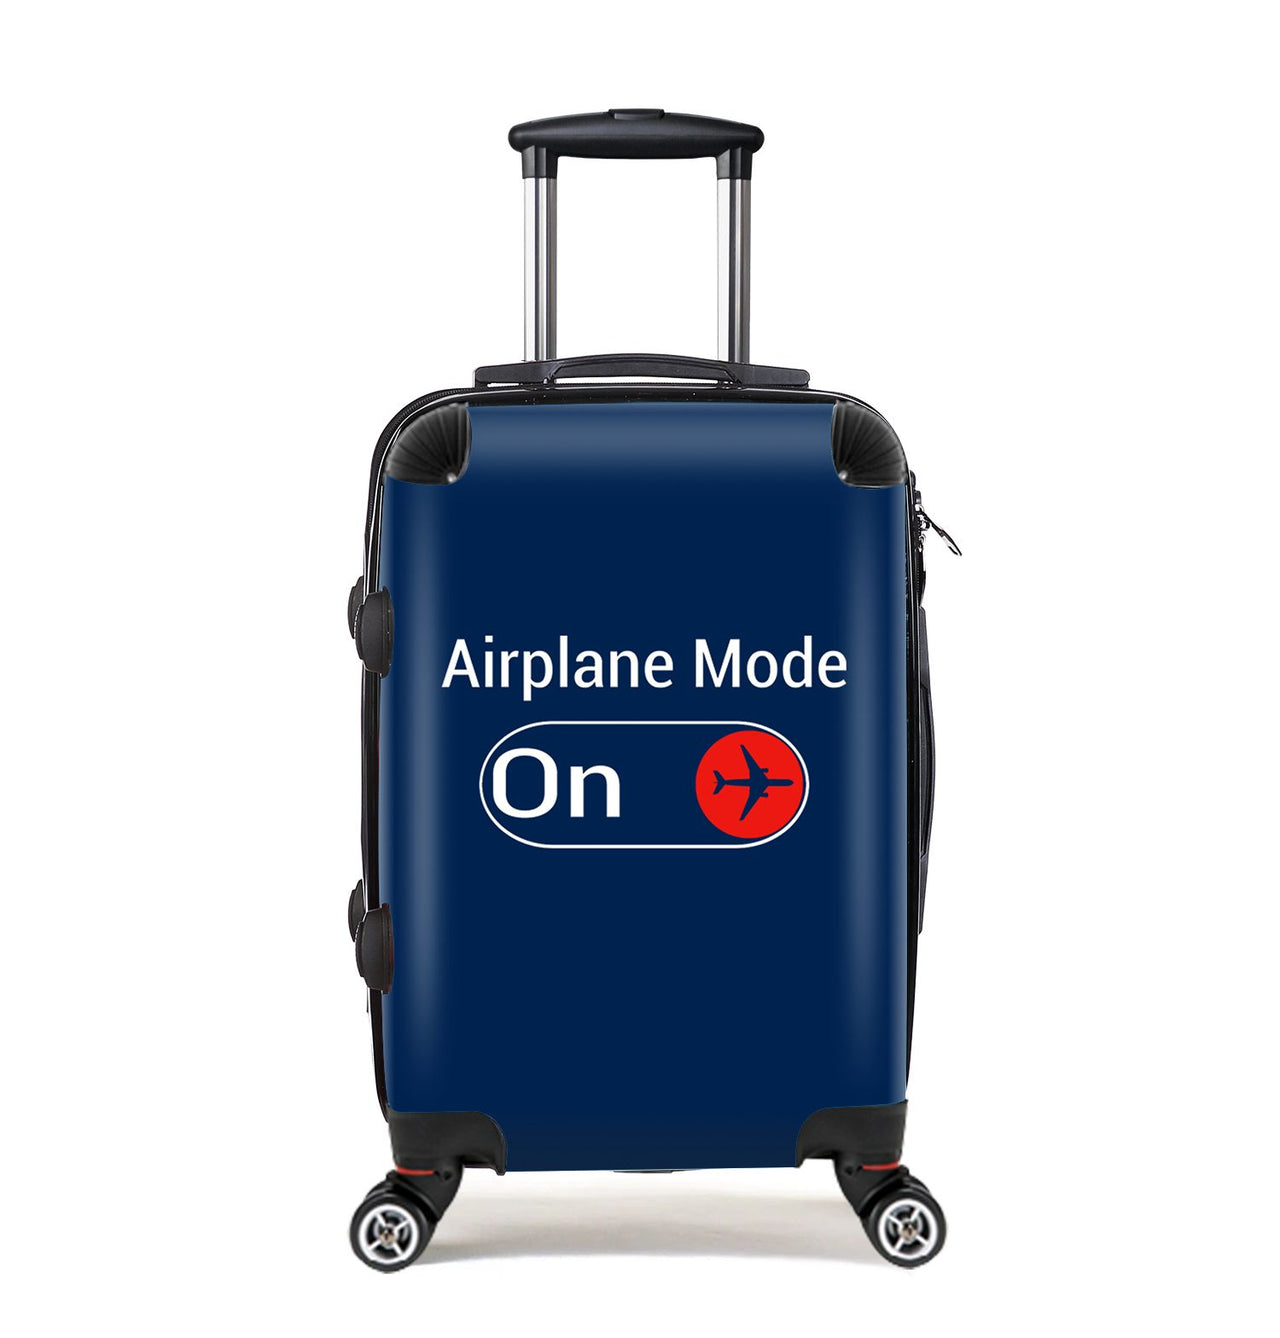 Airplane Mode On Designed Cabin Size Luggages